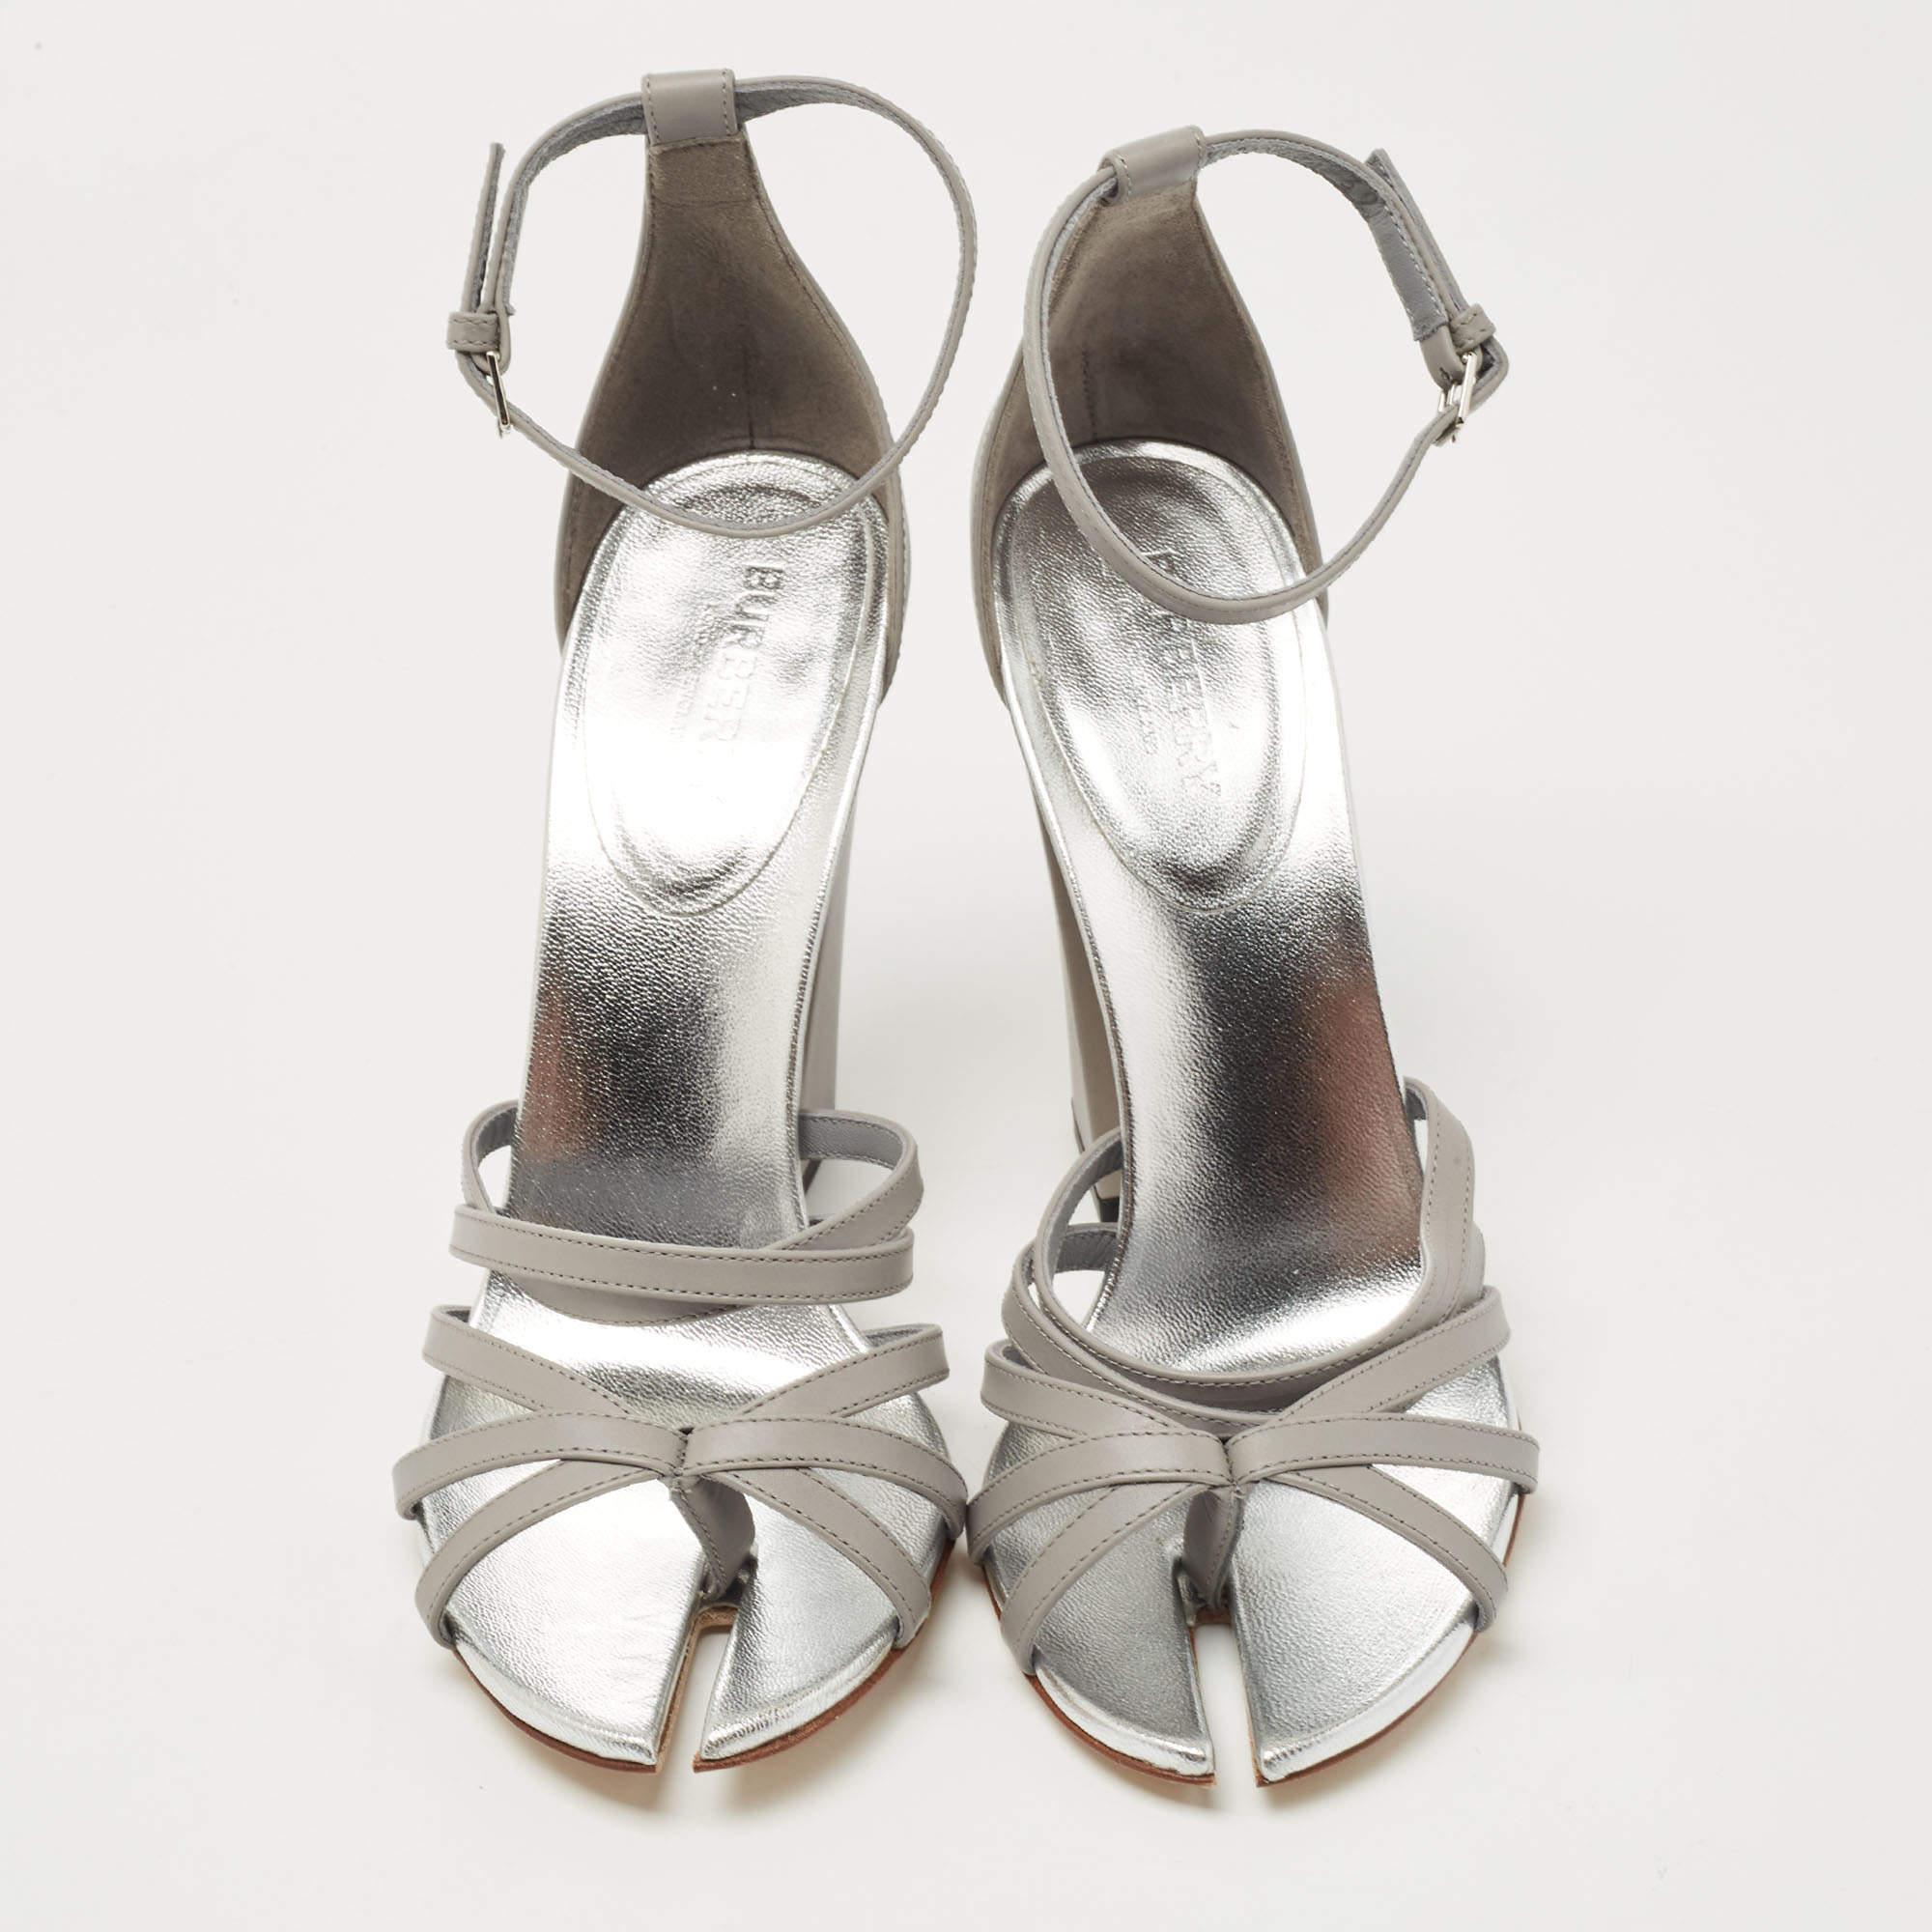 These Burberry grey sandals will frame your feet in an elegant manner. Crafted from quality materials, they flaunt a classy display, comfortable insoles & sleek heels.

Includes: Original Dustbag, Original Box, Tag, Info Booklet

